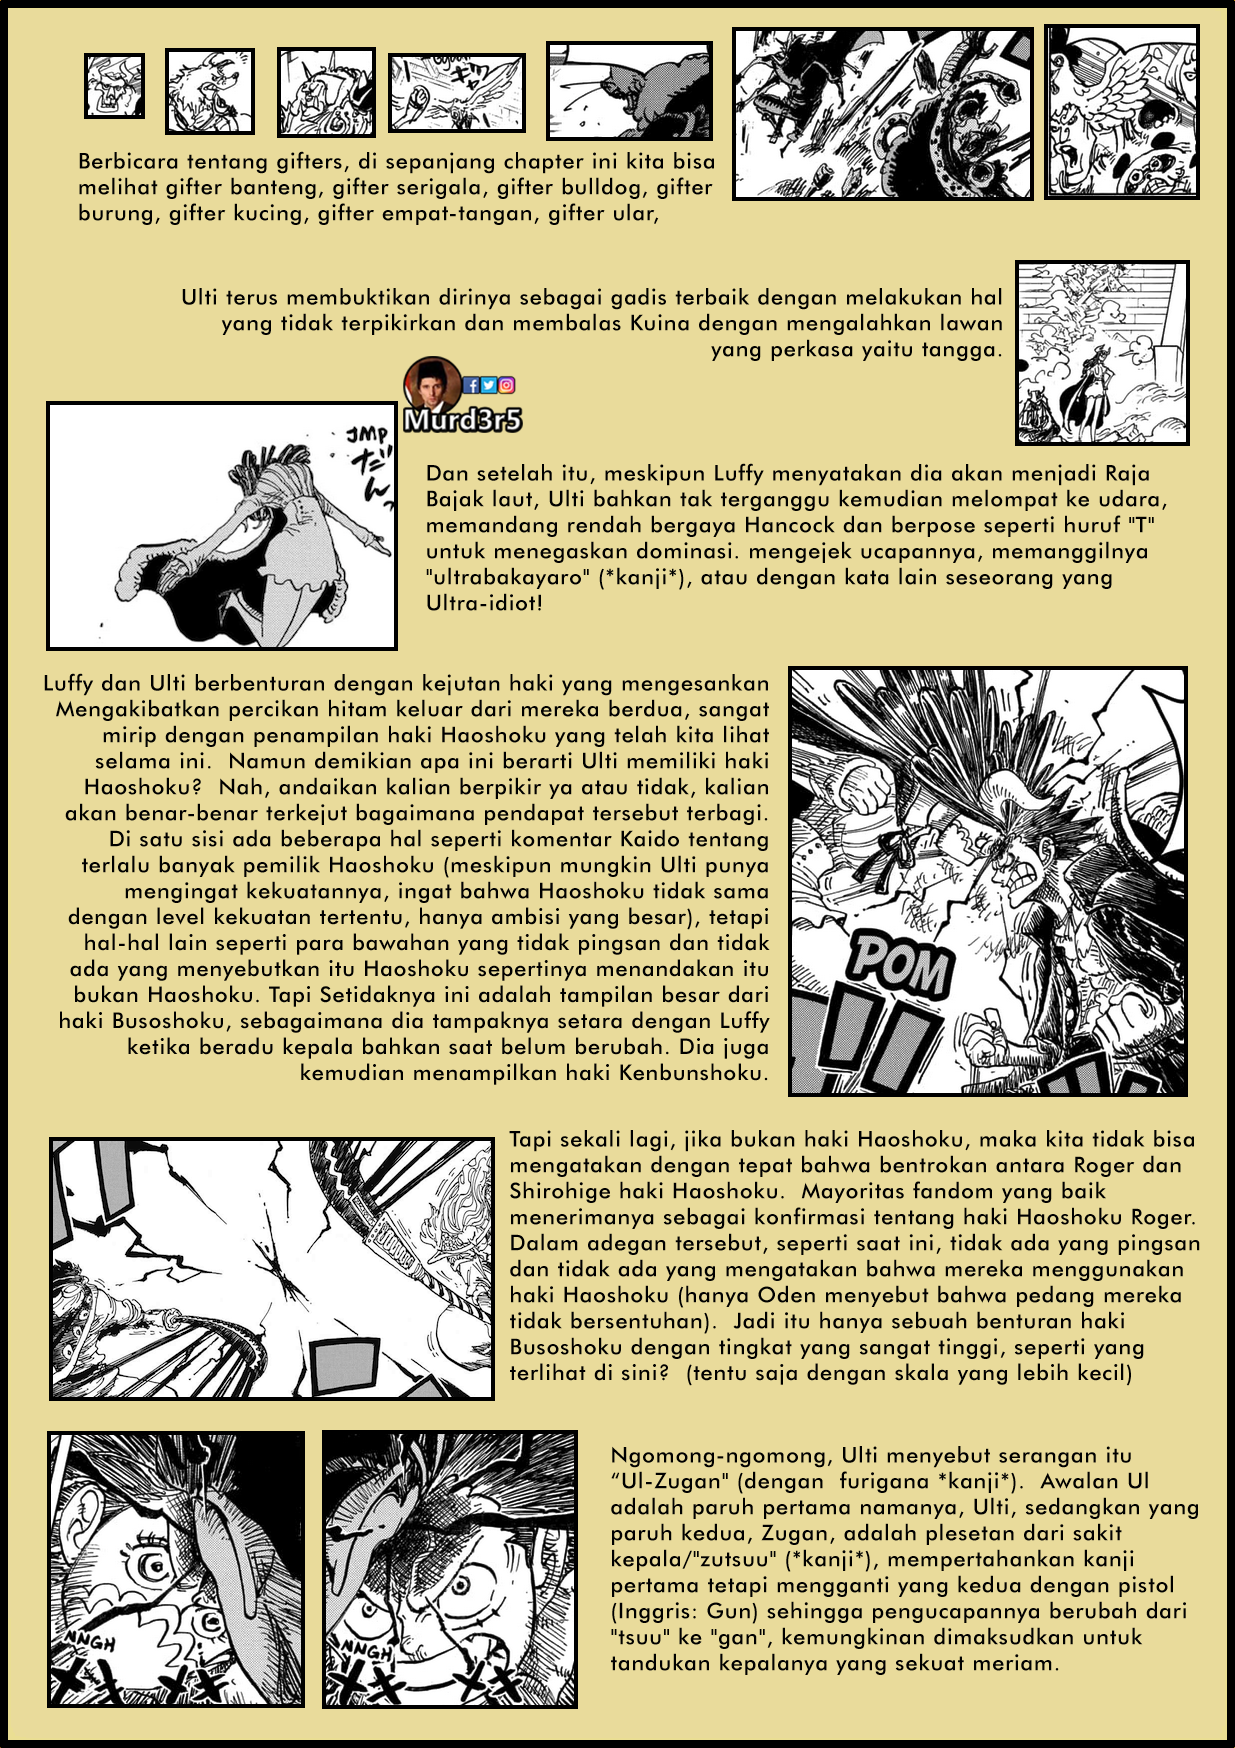 one-piece-chapter-983-analysis-3